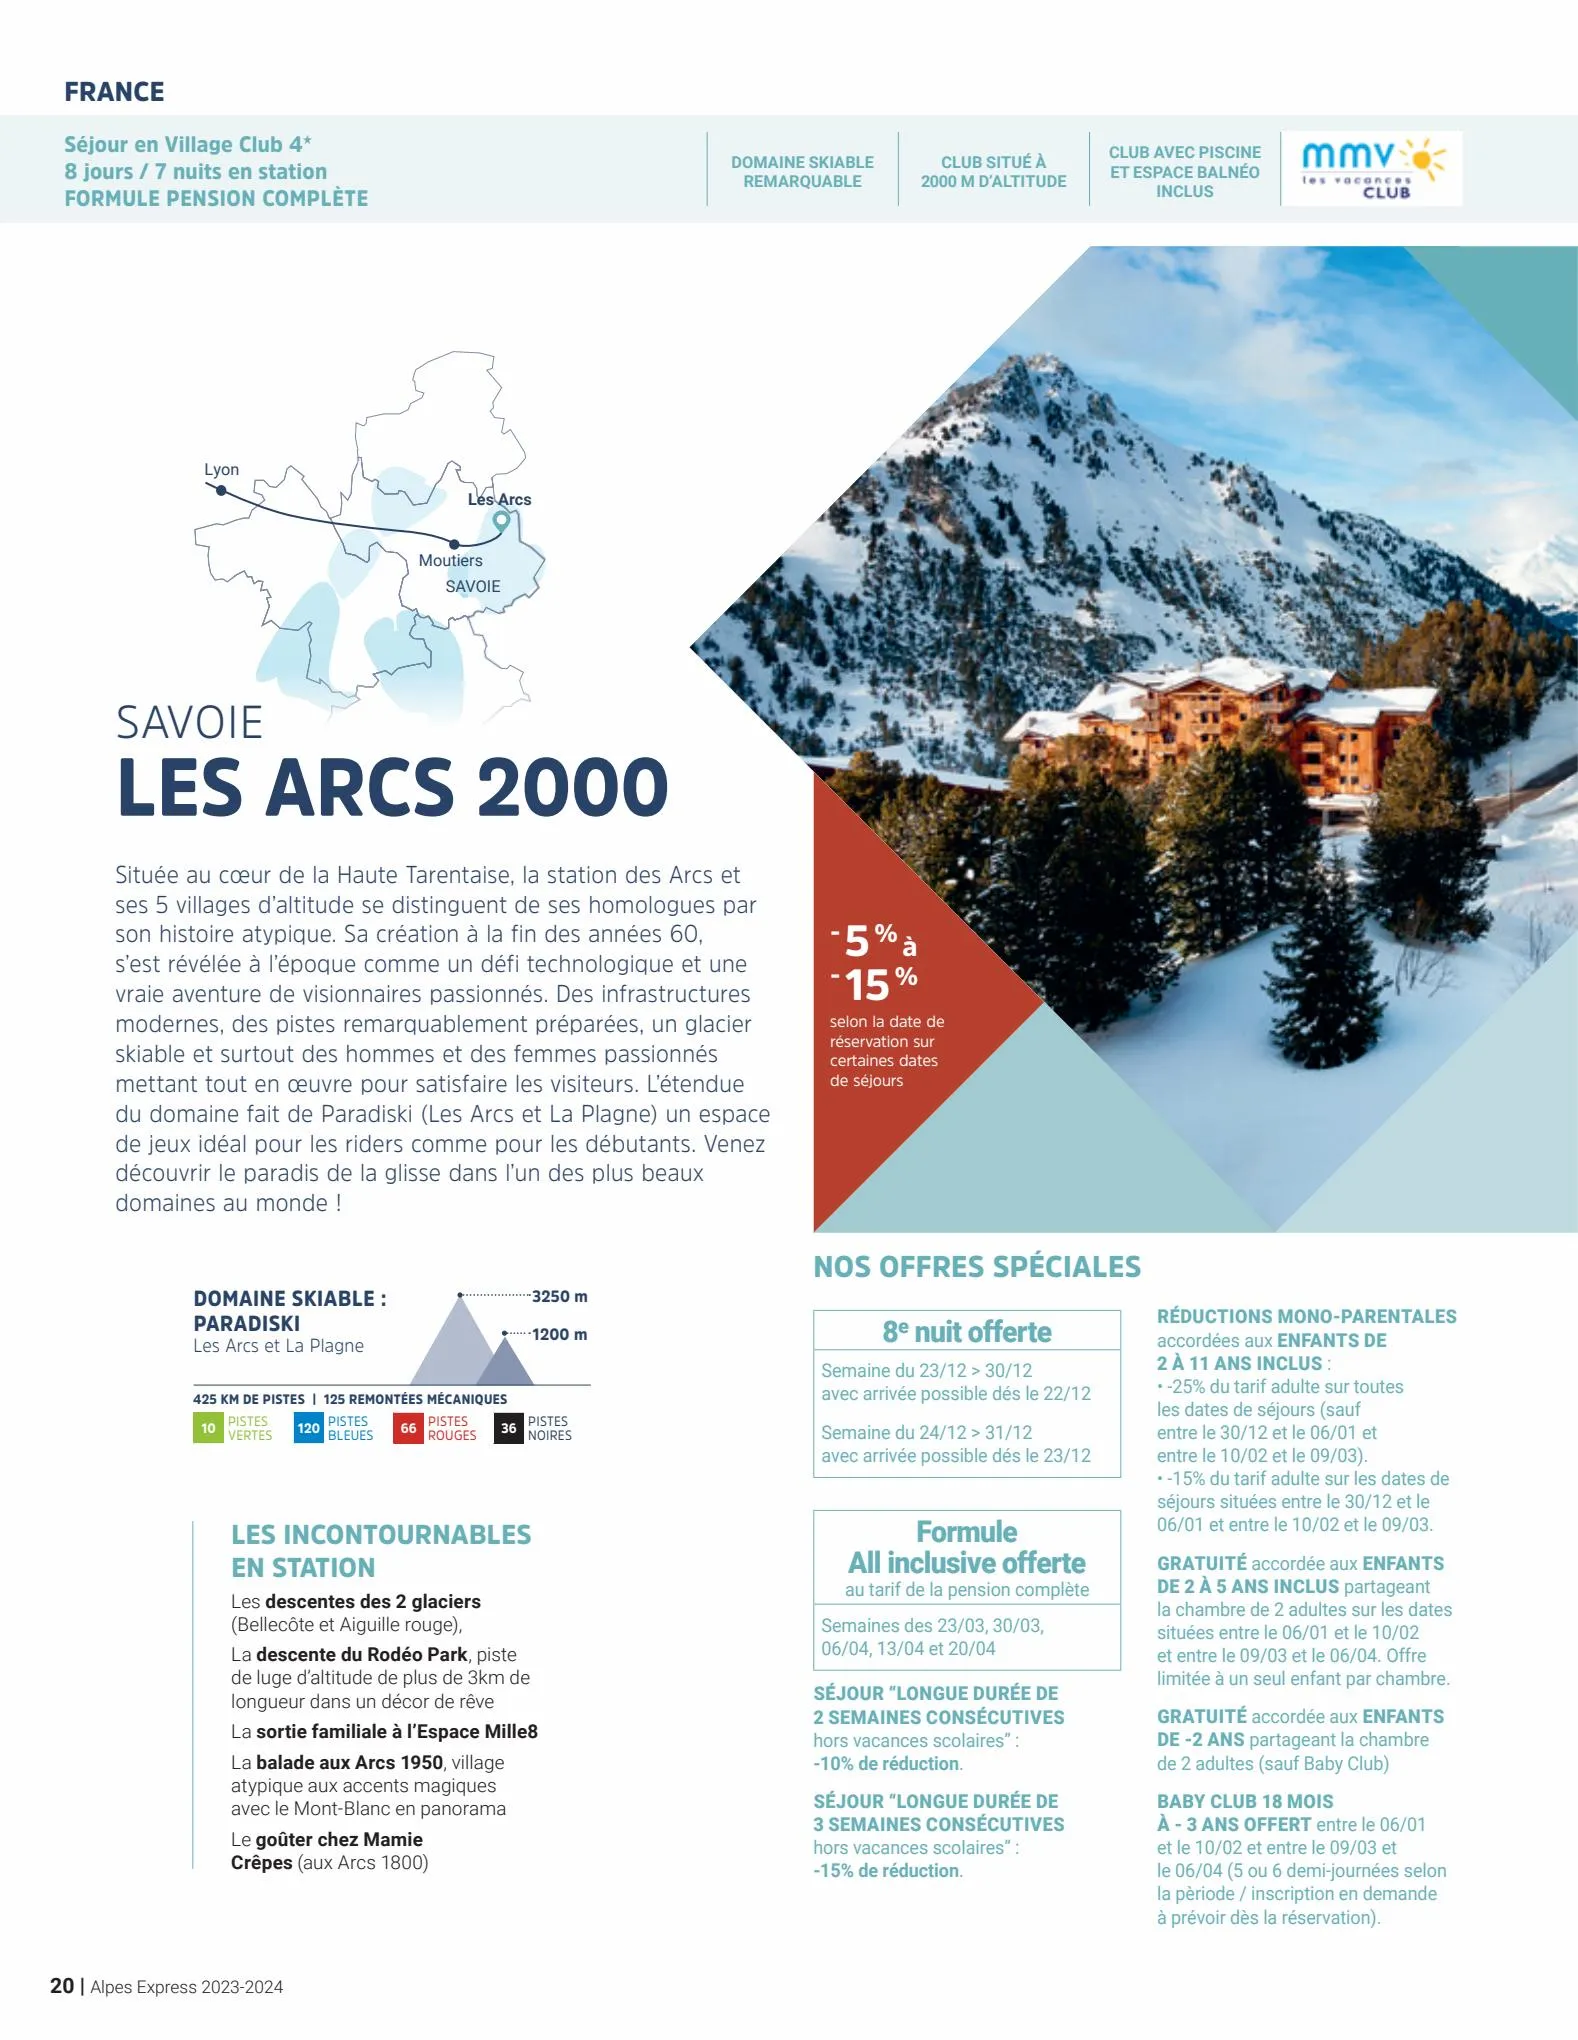 Catalogue Alpes Express - Hiver 2023 - 2024, page 00020